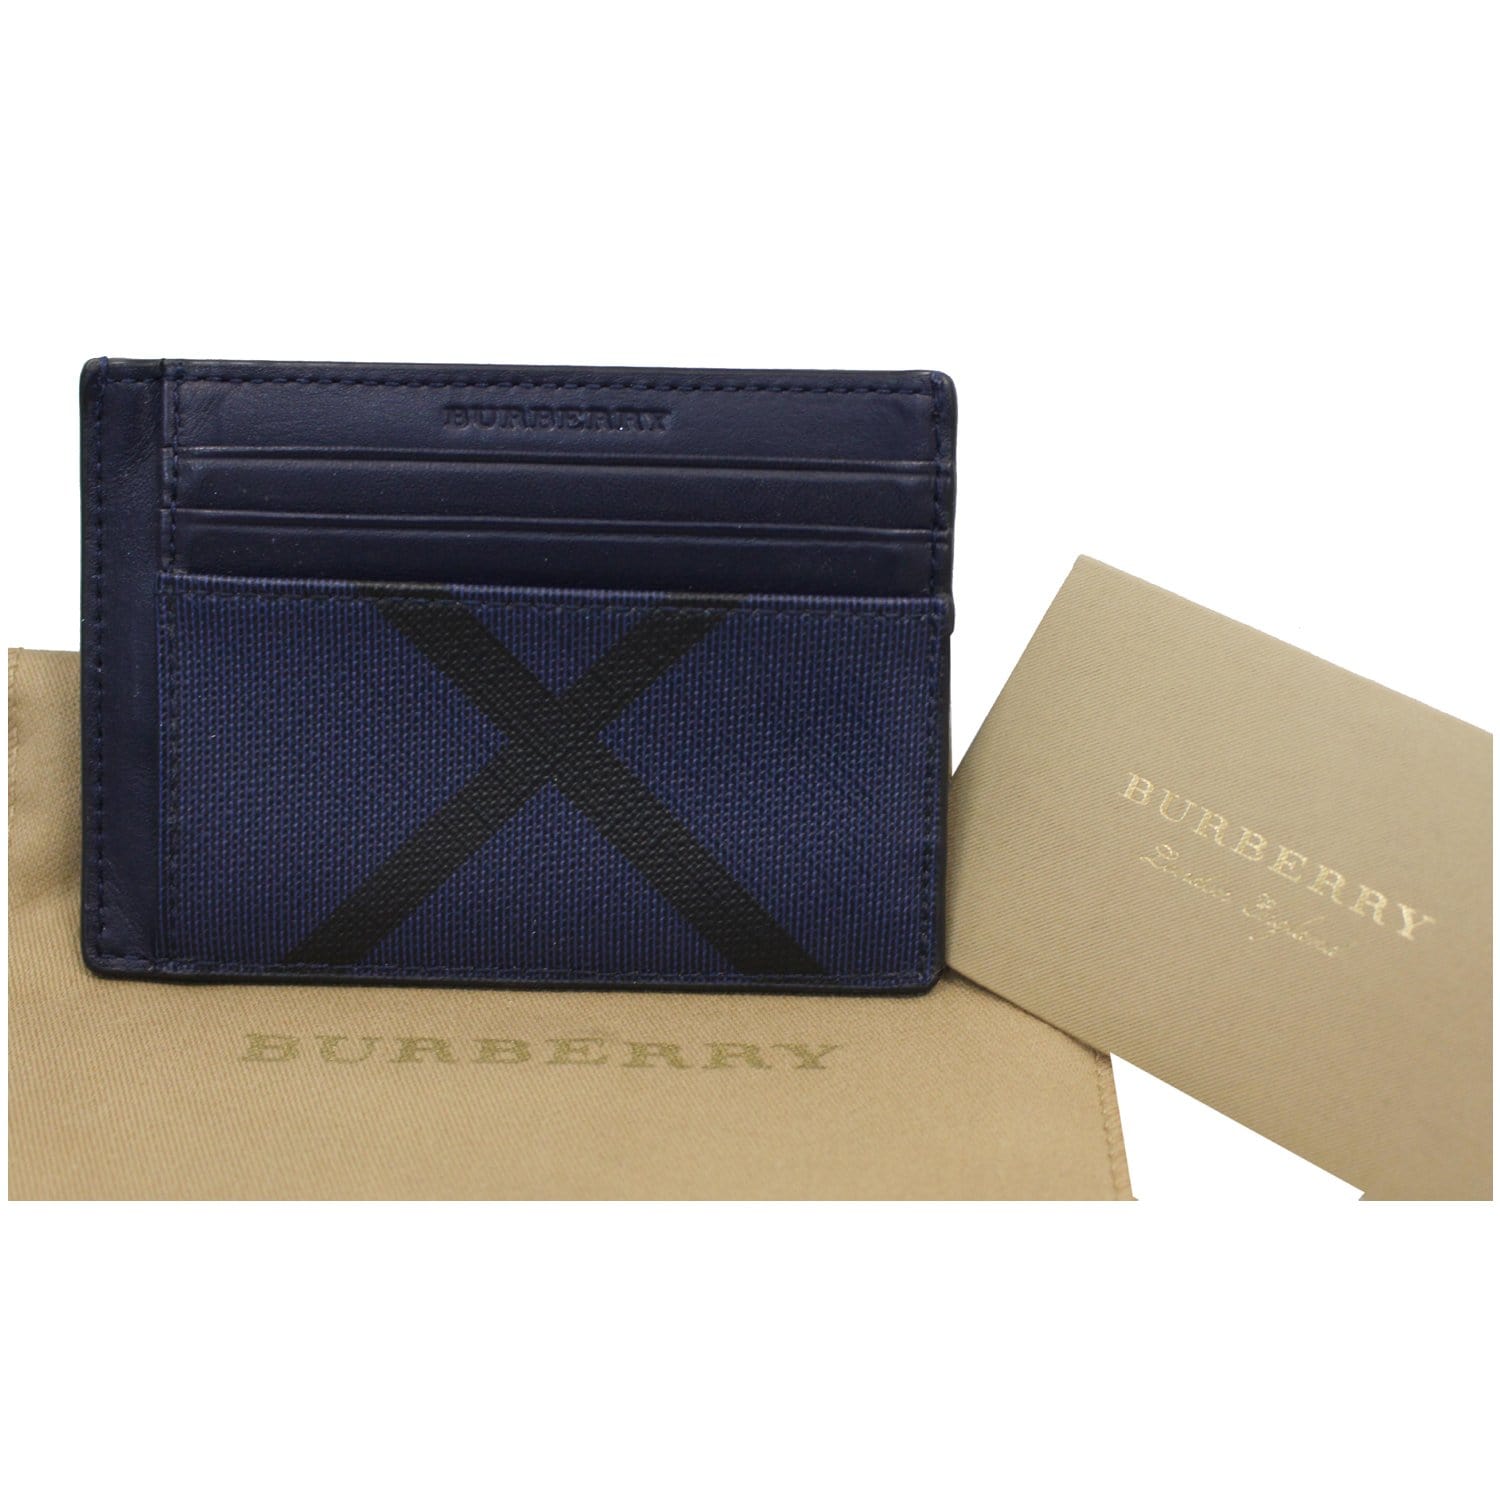 Burberry Men's Check & Leather Card Case